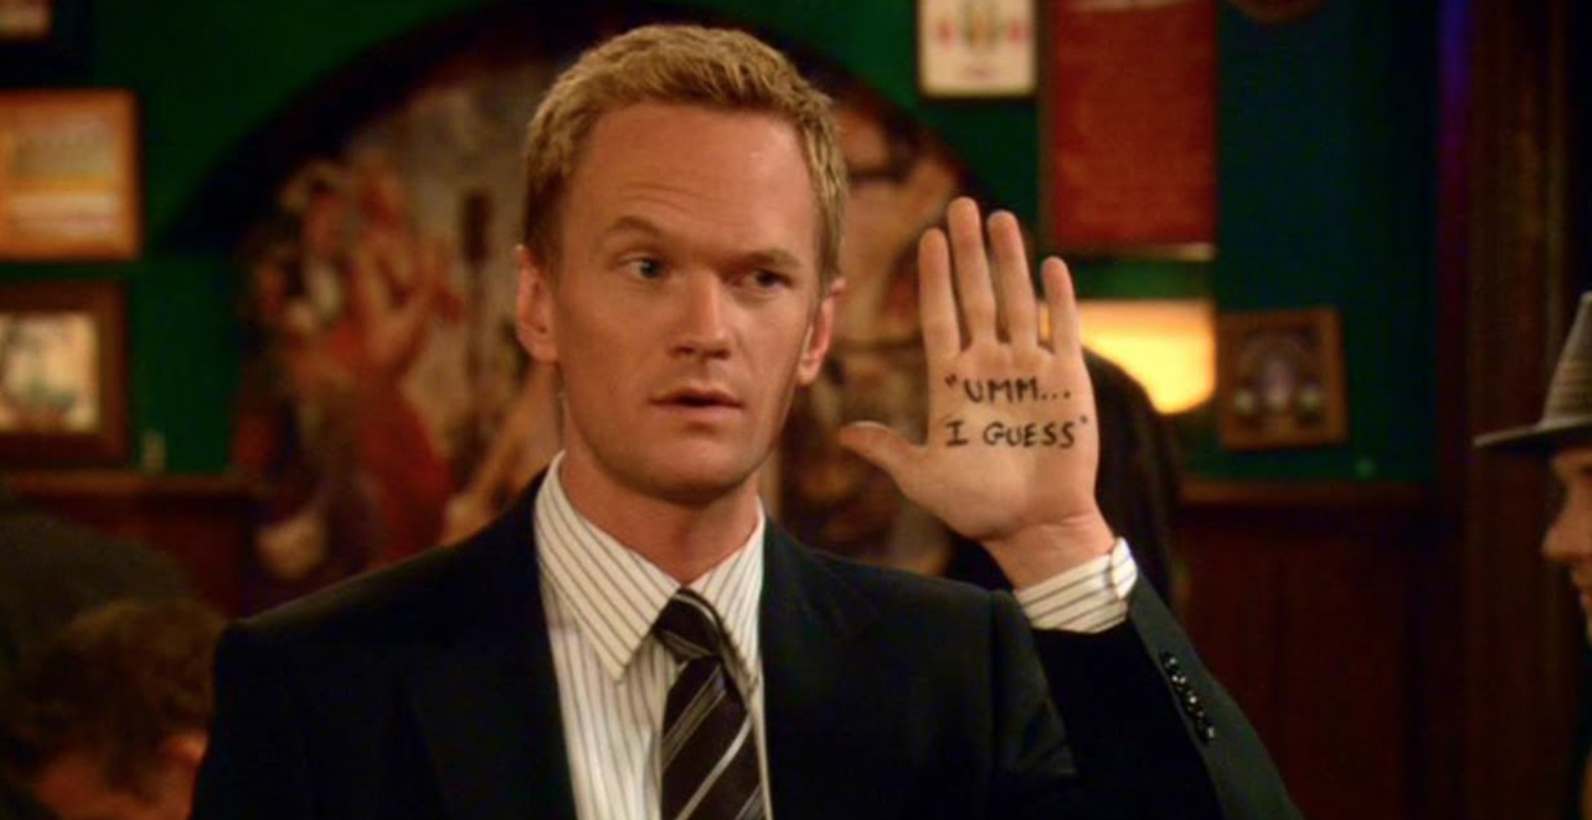 Barney from &quot;How I Met Your Mother&quot; holds up a hand, which has &quot;Um, I guess&quot; handwritten on his palm